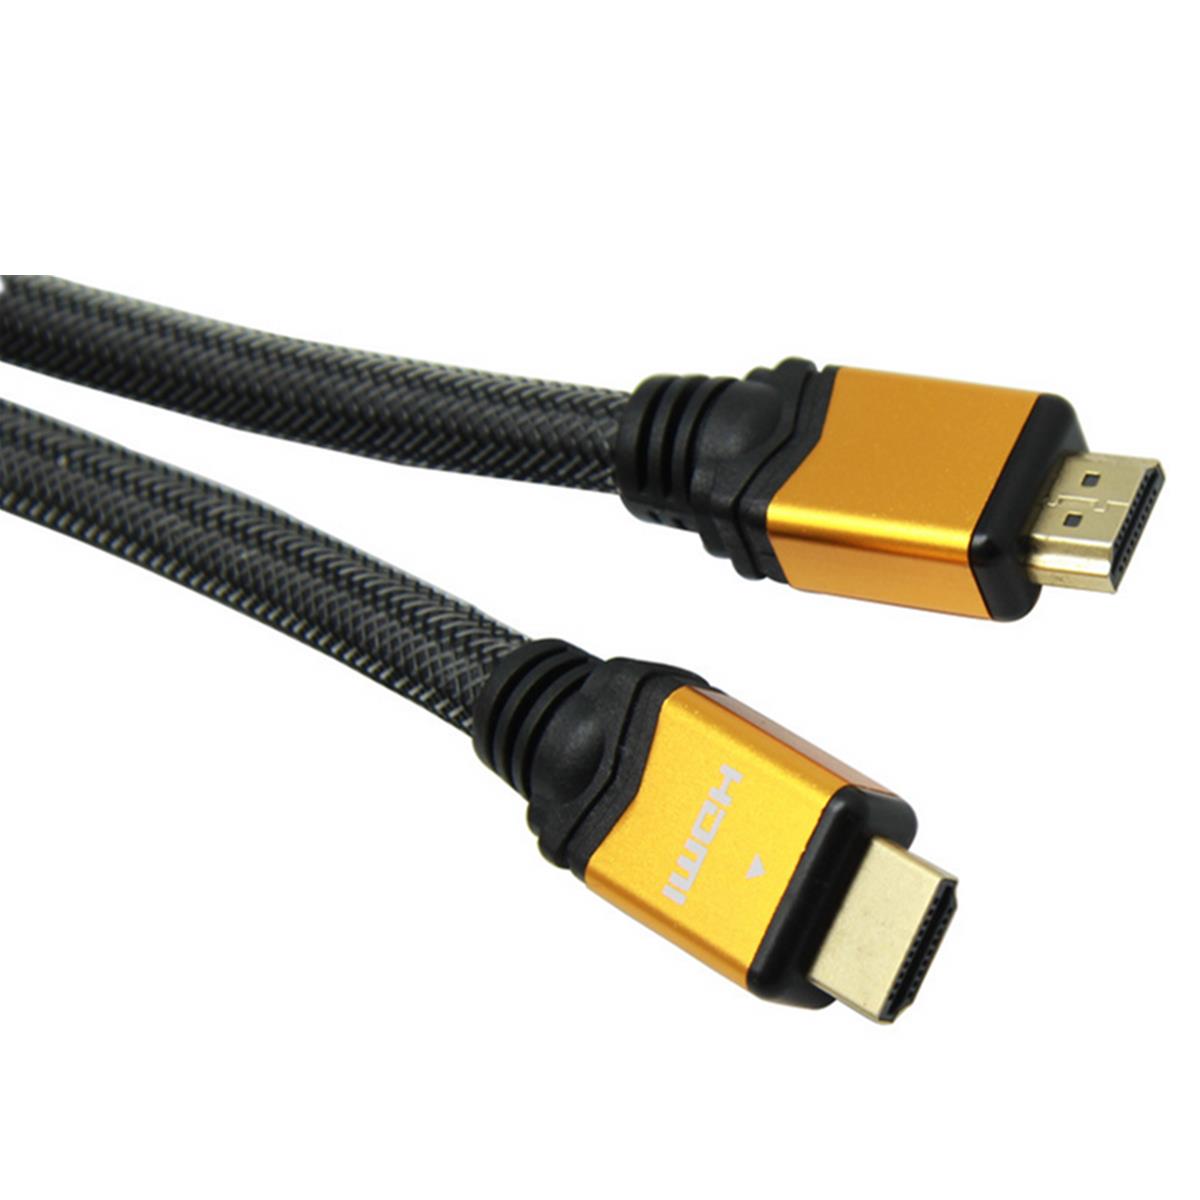 15M-3D-Orange-HD-Cable-Lead-V20-Gold-High-Speed-for-HDTV-Ultra-Hd-HD-2160p-4K-1131620-6